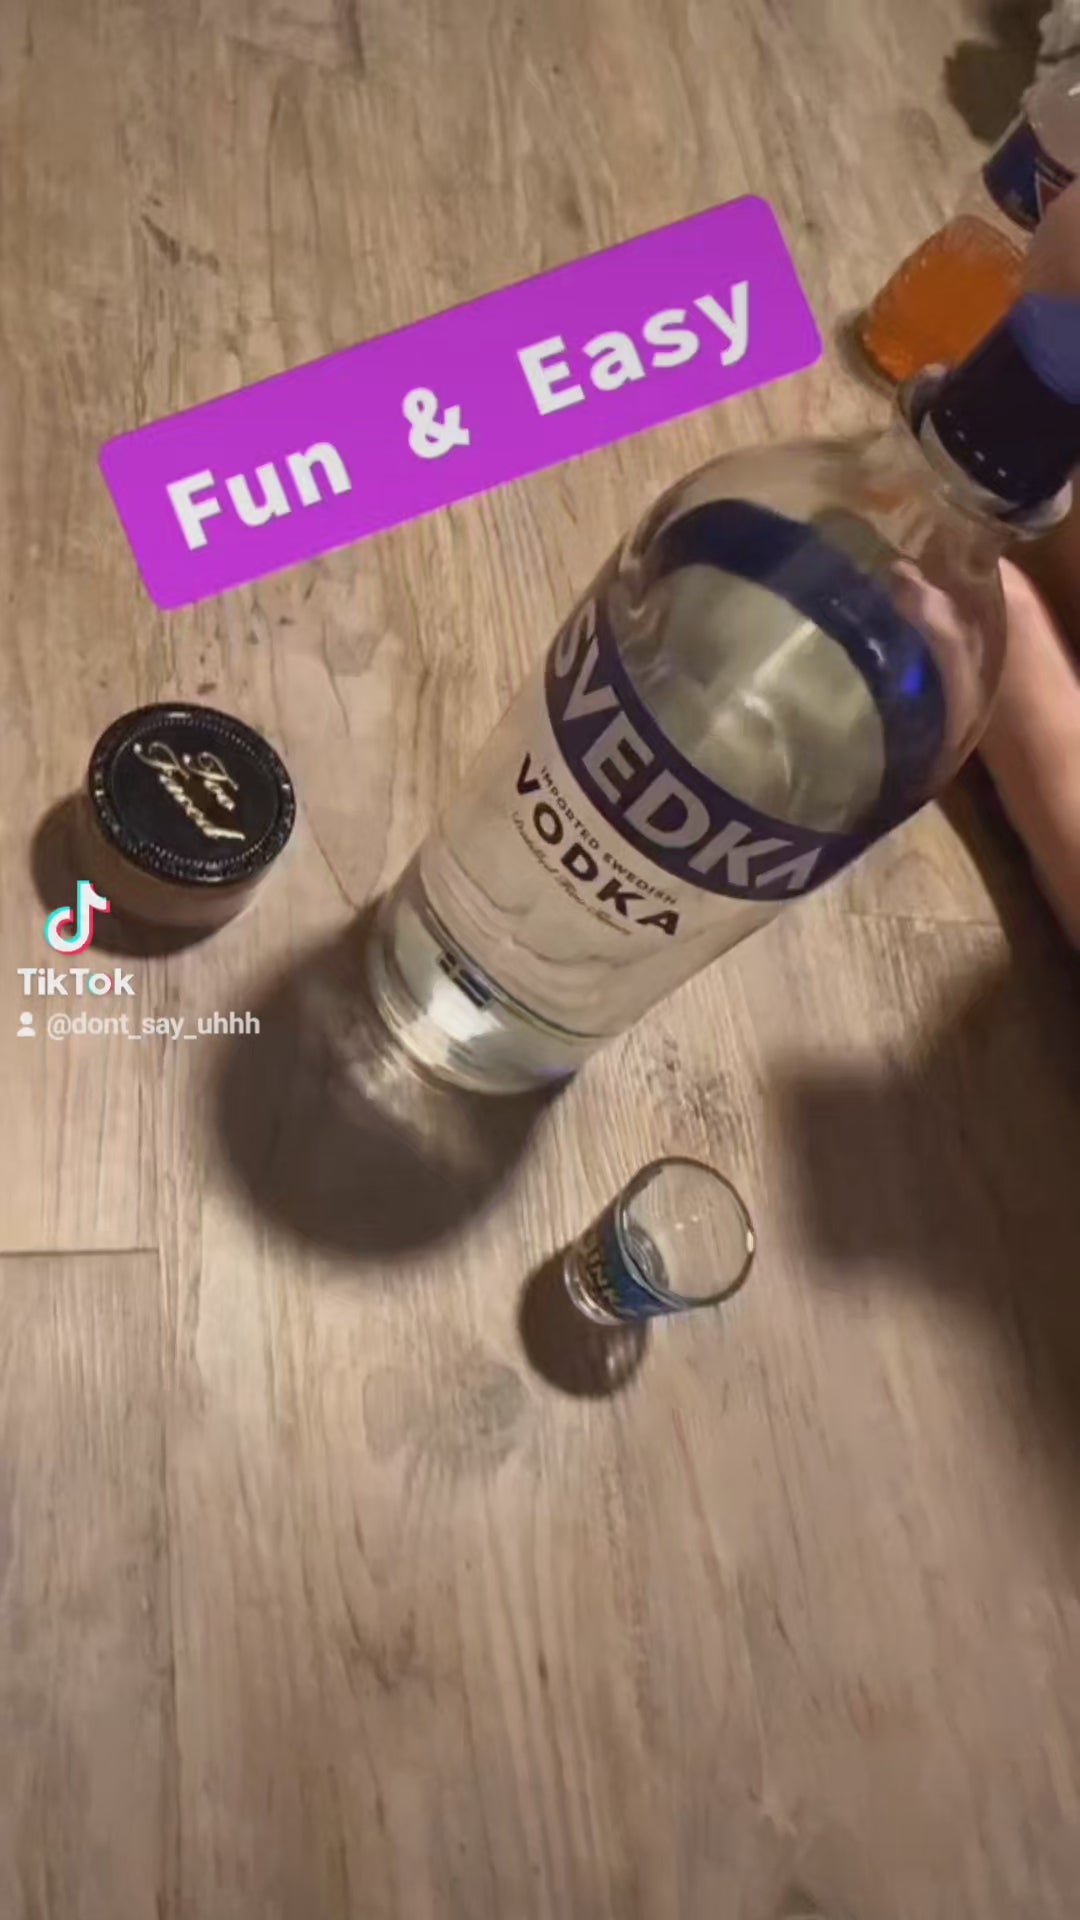 In a lively party setting, friends gather around a table, pouring shots of vodka into shot glasses with excitement. The camera then zooms in on a game box labeled 'Don't Say Uhhh,' indicating the start of a drinking game.